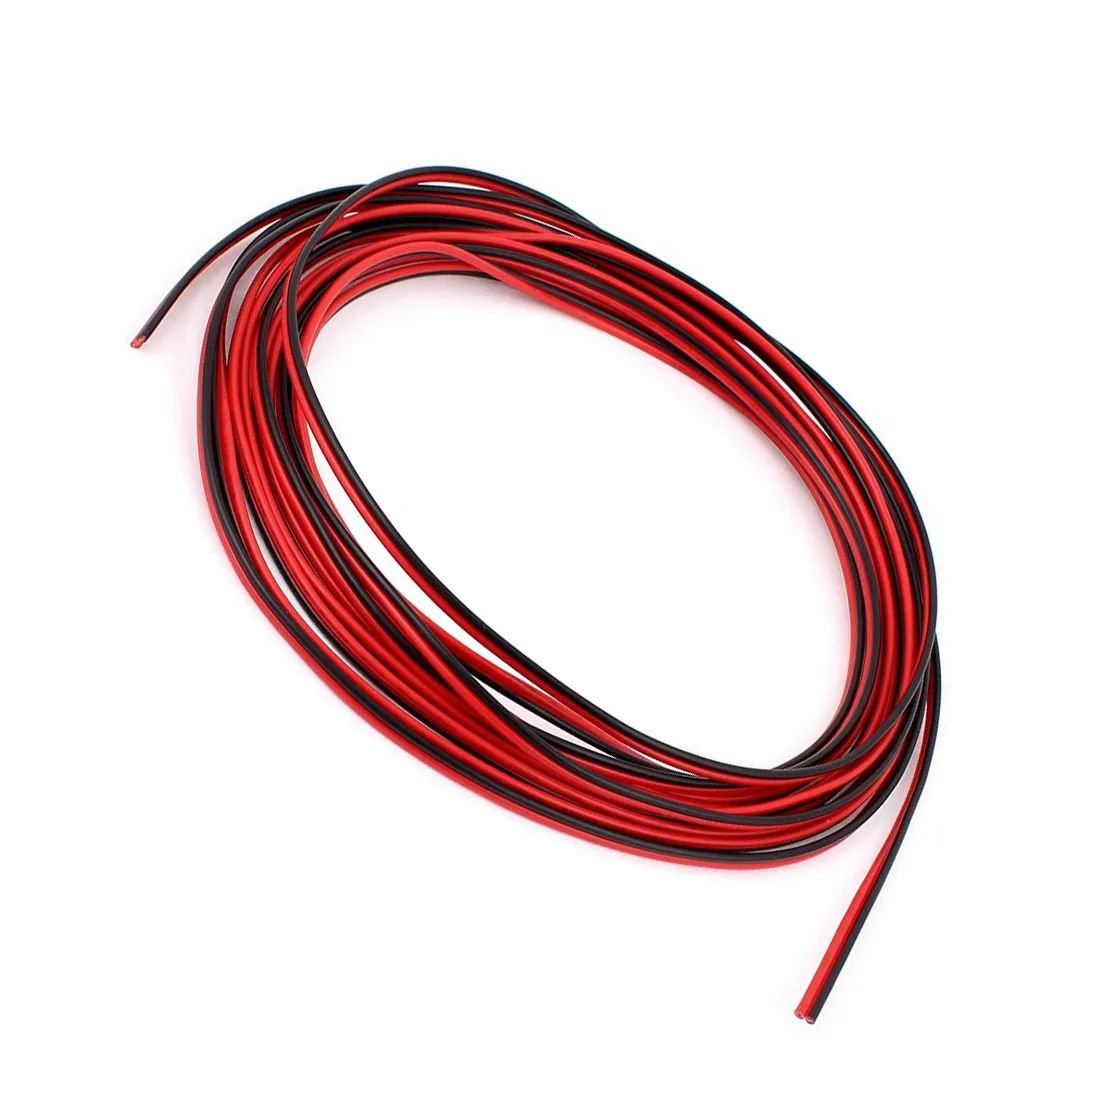 5M 22AWG Red Black Dual Core Electric Cable Wire for Car Auto Speaker H5J5 